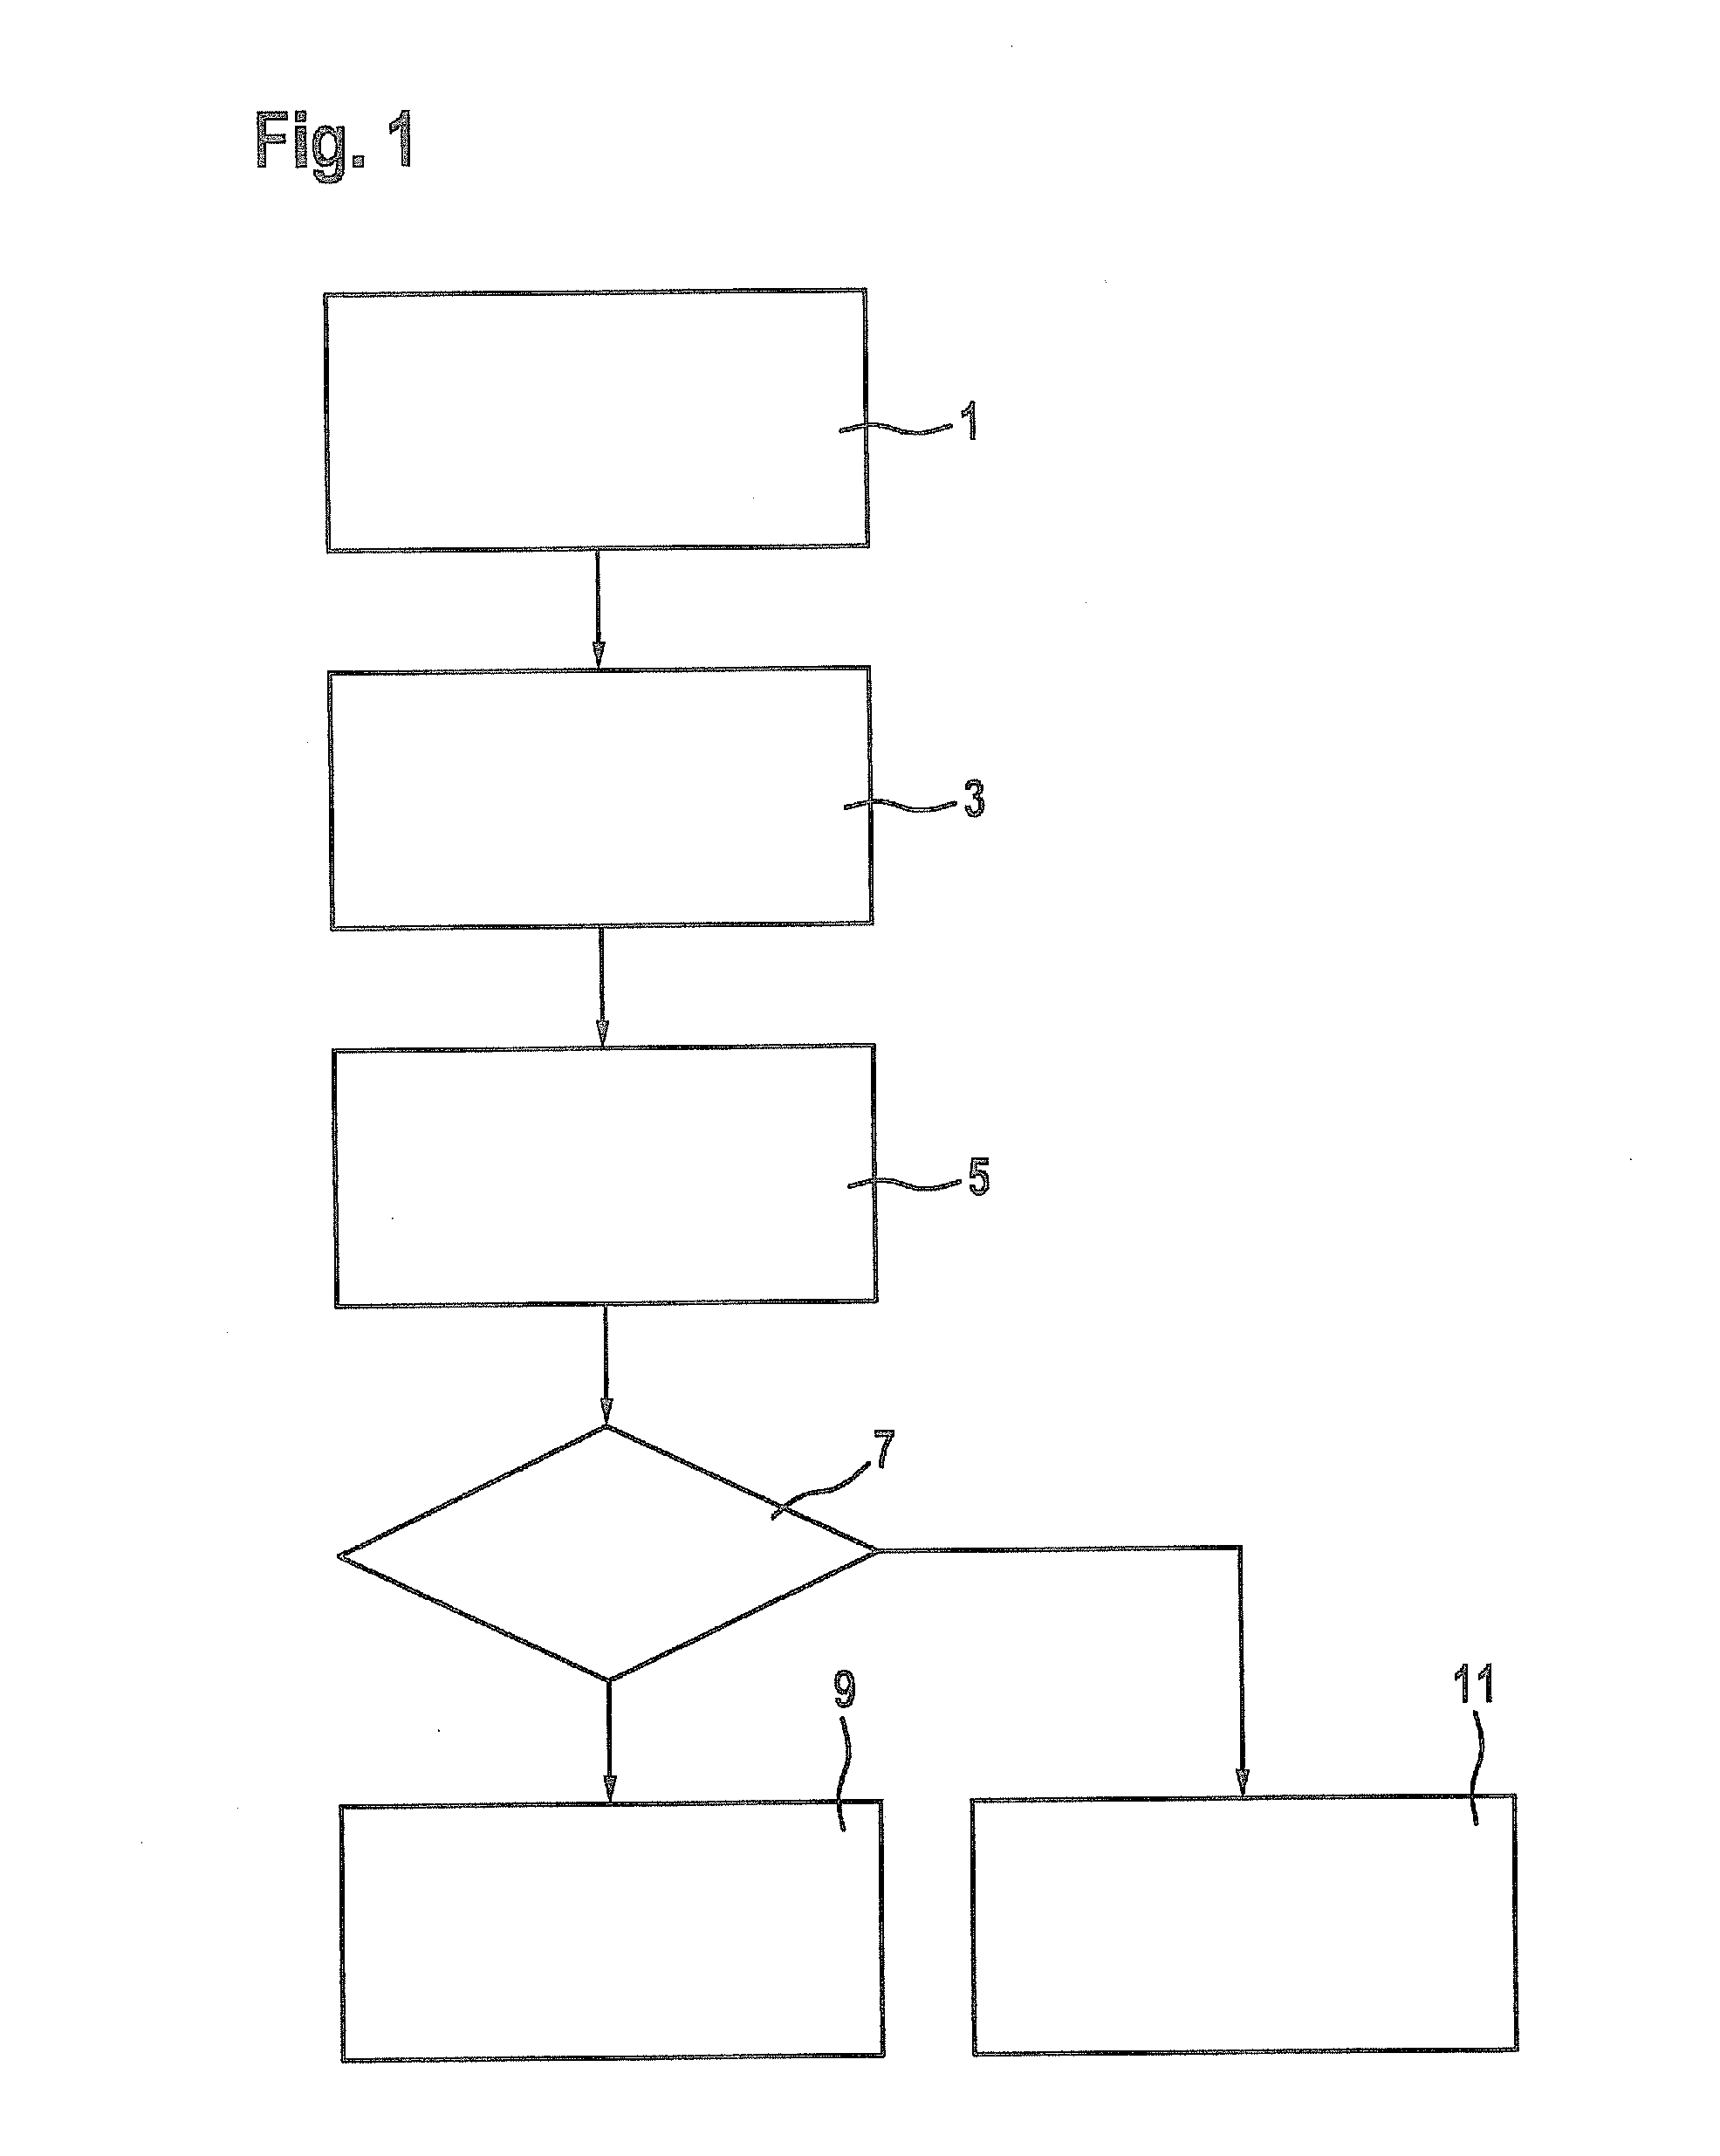 Method for assisting a driver of a motor vehicle